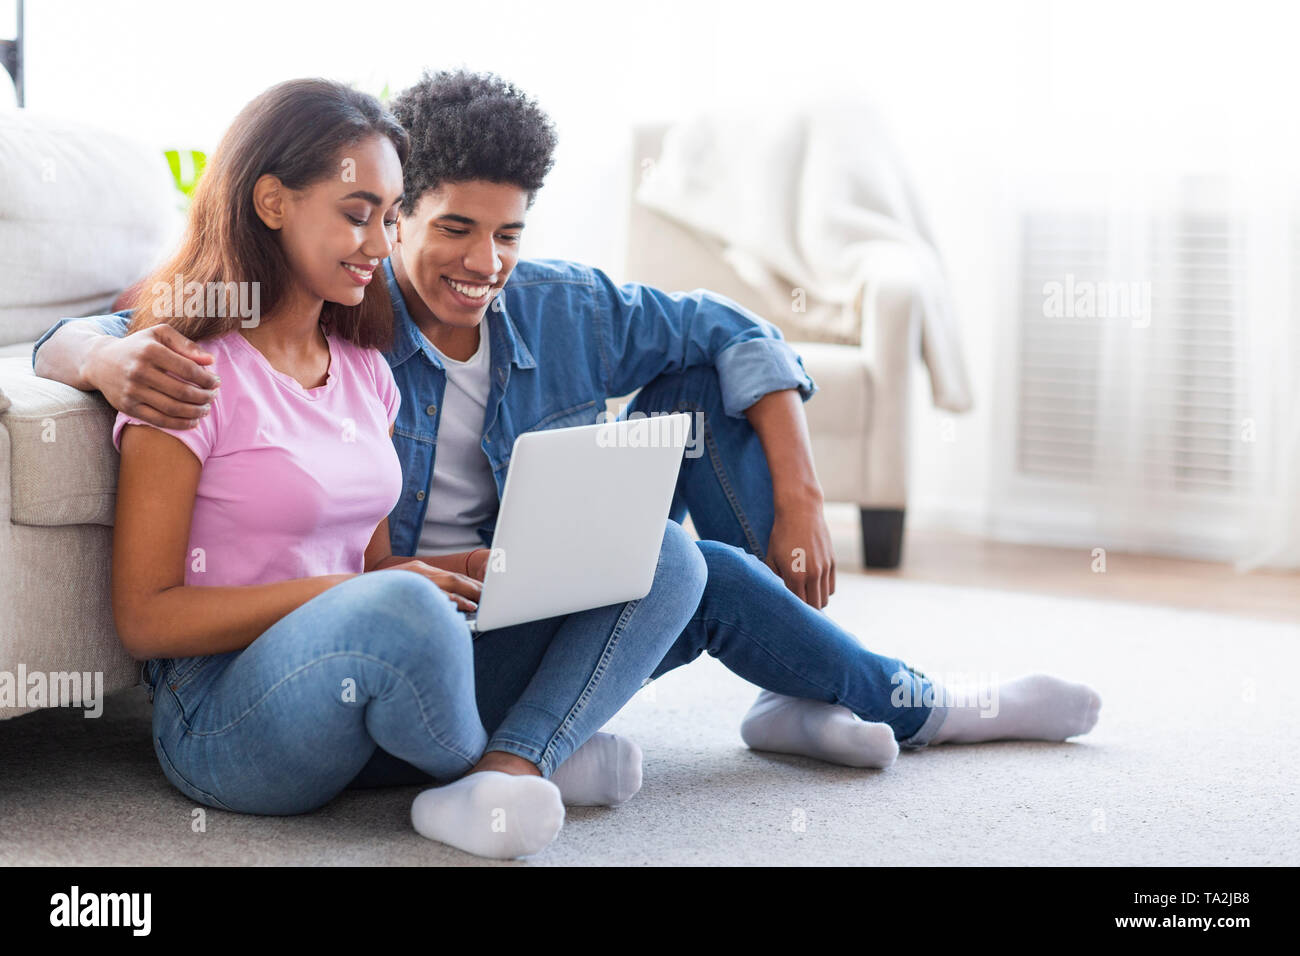 Black boy and girl using laptop, sitting on floor together Stock Photo